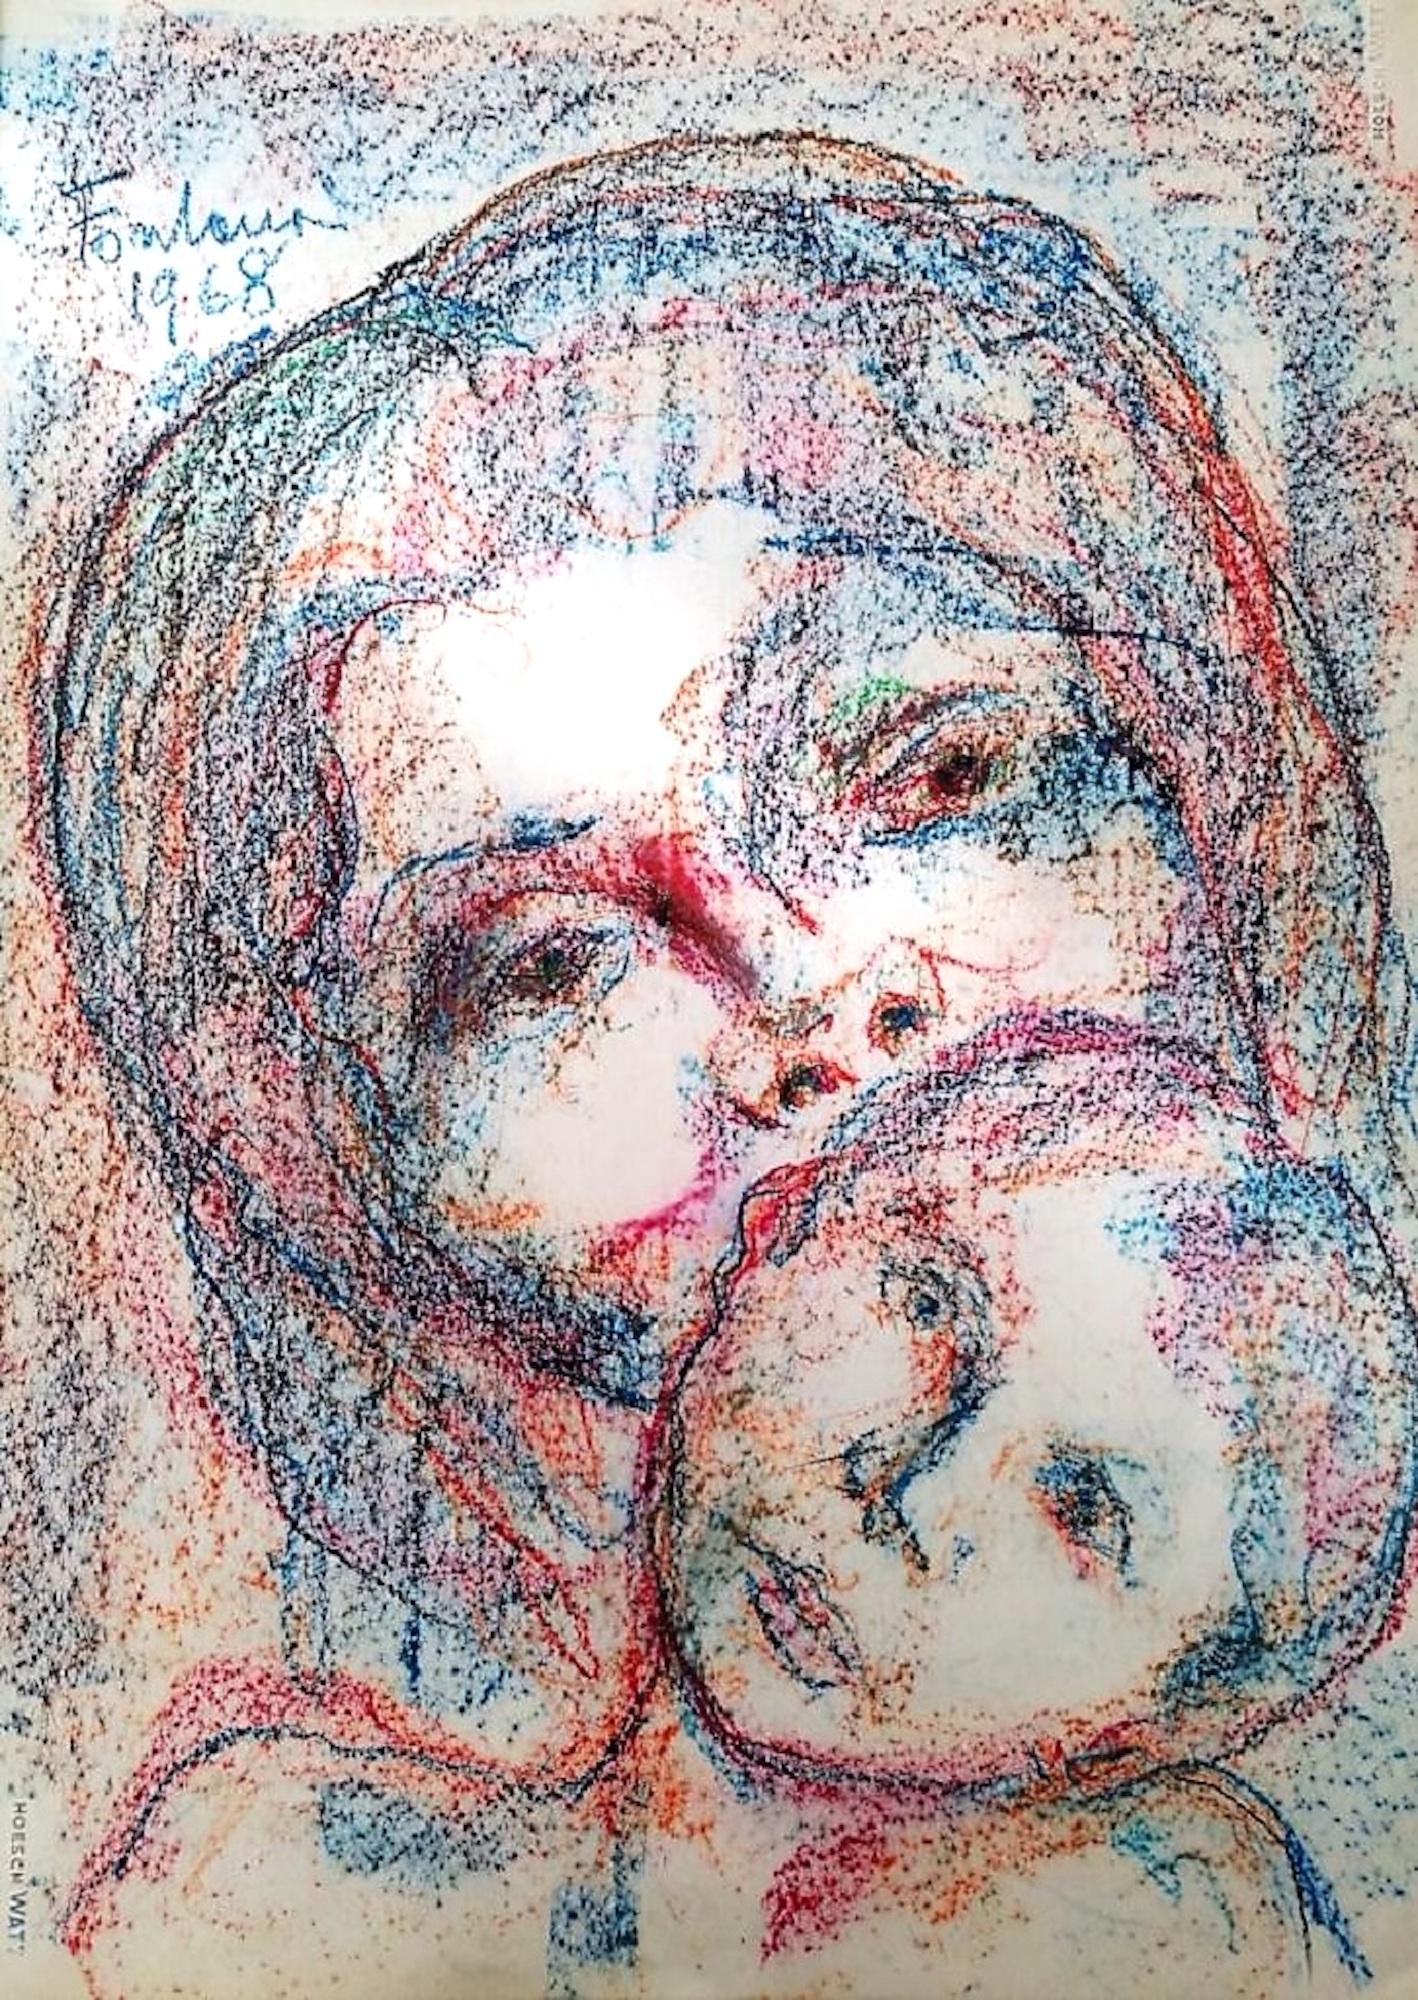 Female Figure with Baby is an original artwork realized by Giovanni Fontana in 1968.

In pastel colors on paper. Hand-signed and dated by the artist on the upper left margin (Fontana 1968).
Excellent conditions. 

The artwork represents a female